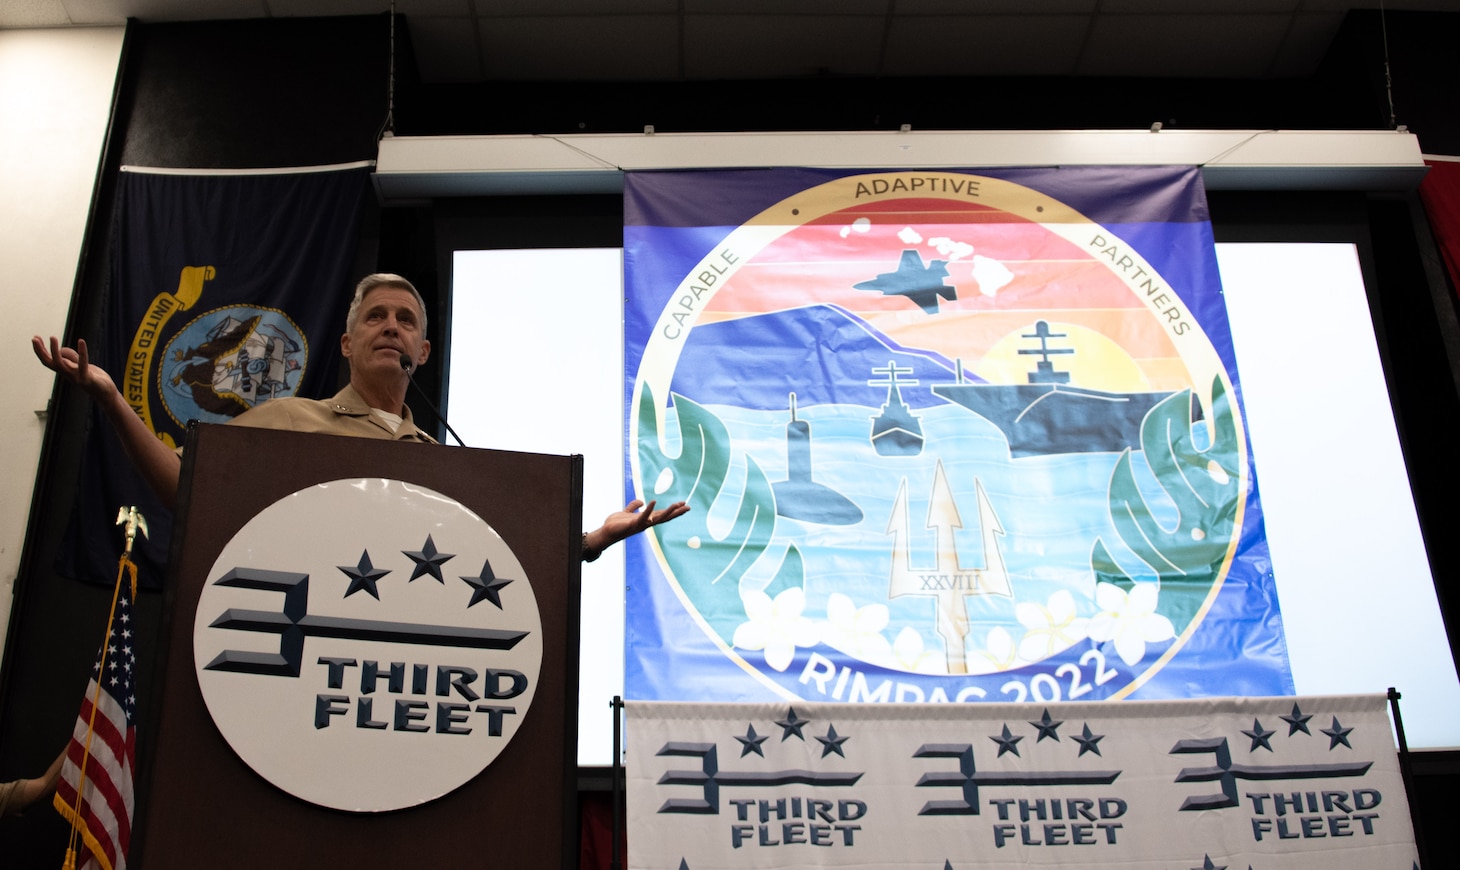 SAN DIEGO (November 30, 2021) Vice Adm. Steve Koehler, commander, U.S. 3rd Fleet, reveals the official Exercise Rim of the Pacific (RIMPAC) 2022 logo during the RIMPAC 2022 mid-planning conference (MPC) at Naval Base Point Loma, Nov. 30. Participants from all countries scheduled for RIMPAC 2022 are in attendance at the weeklong conference that affords attendees the opportunity to share information and integrate planning efforts. (U.S. Navy photo by Mass Communication Specialist 1st Class David Mora Jr.)